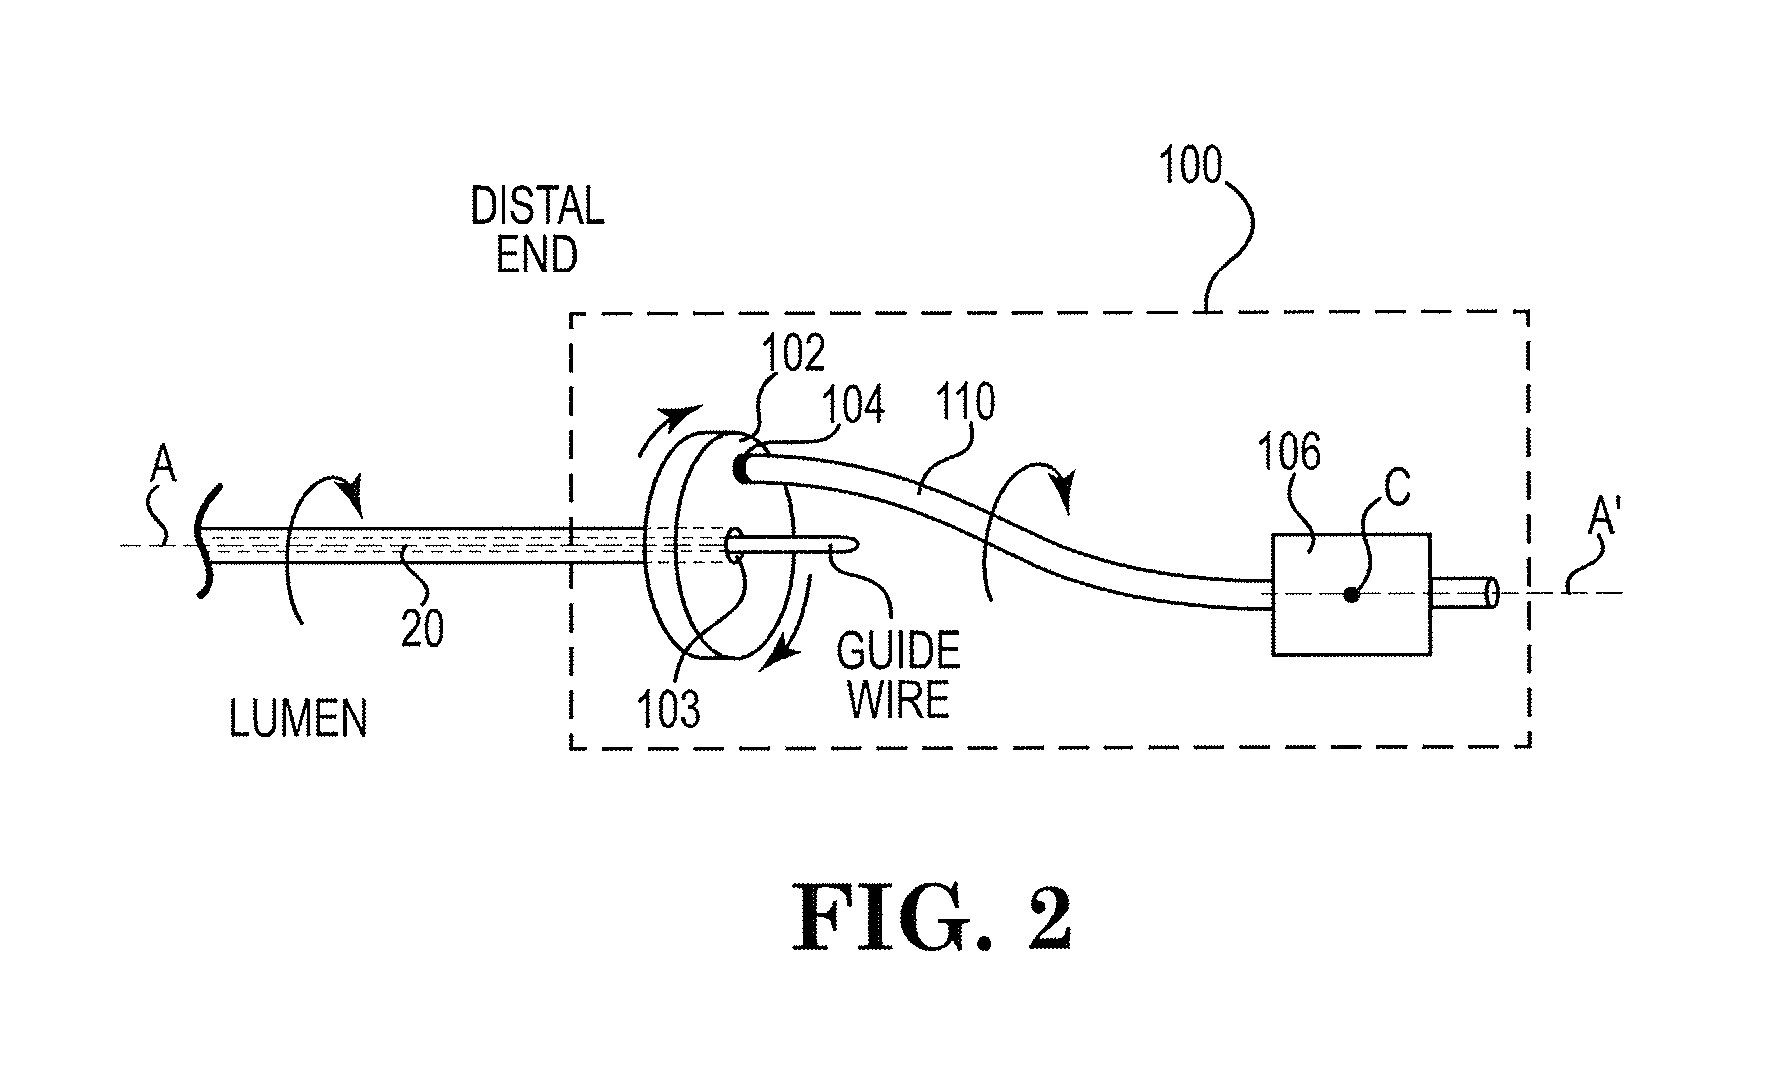 Devices, systems and methods for an oscillating crown drive for rotational atherectomy